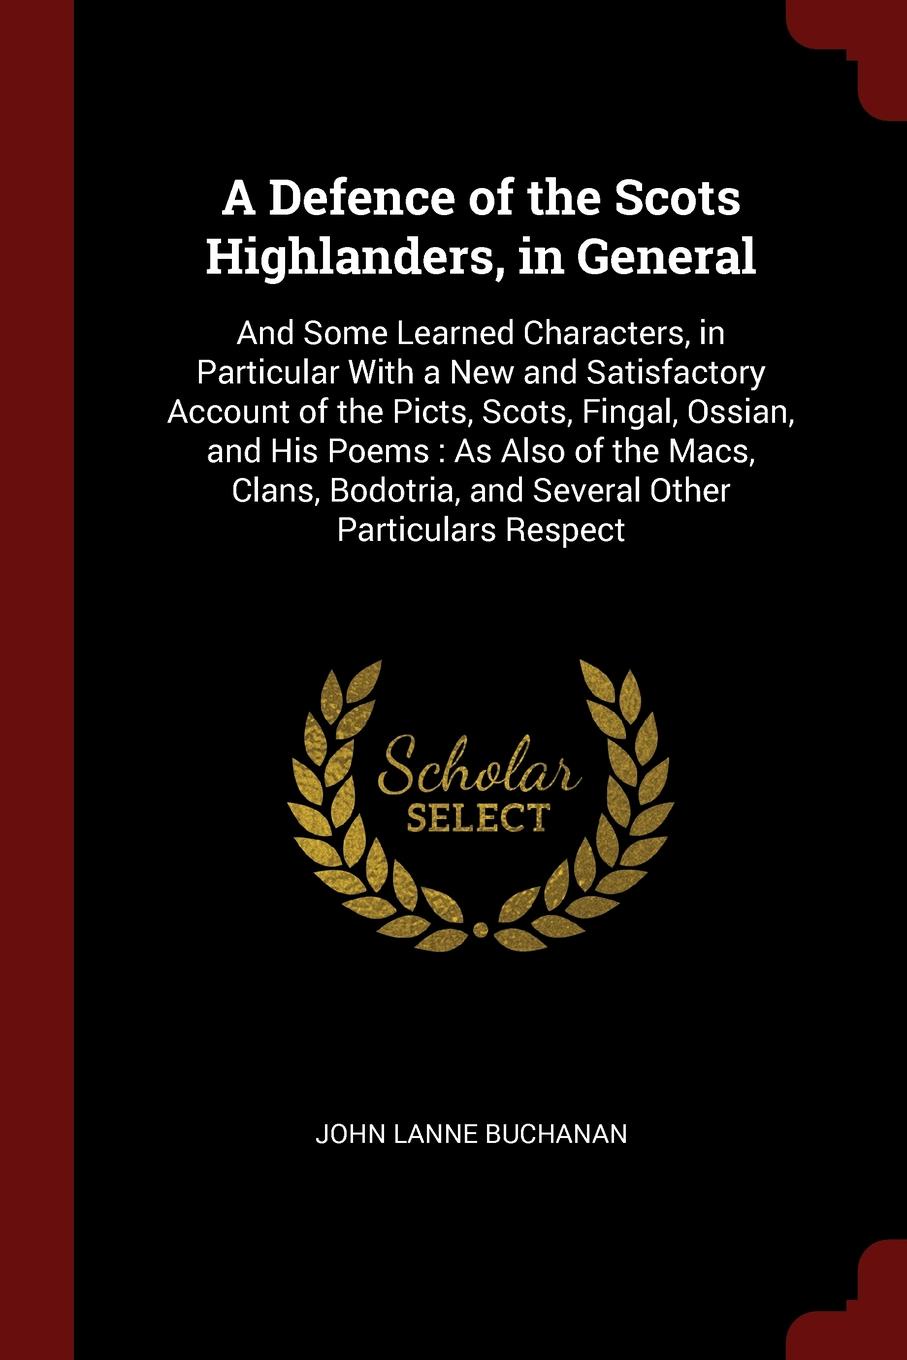 A Defence of the Scots Highlanders, in General. And Some Learned Characters, in Particular With a New and Satisfactory Account of the Picts, Scots, Fingal, Ossian, and His Poems : As Also of the Macs, Clans, Bodotria, and Several Other Particulars...